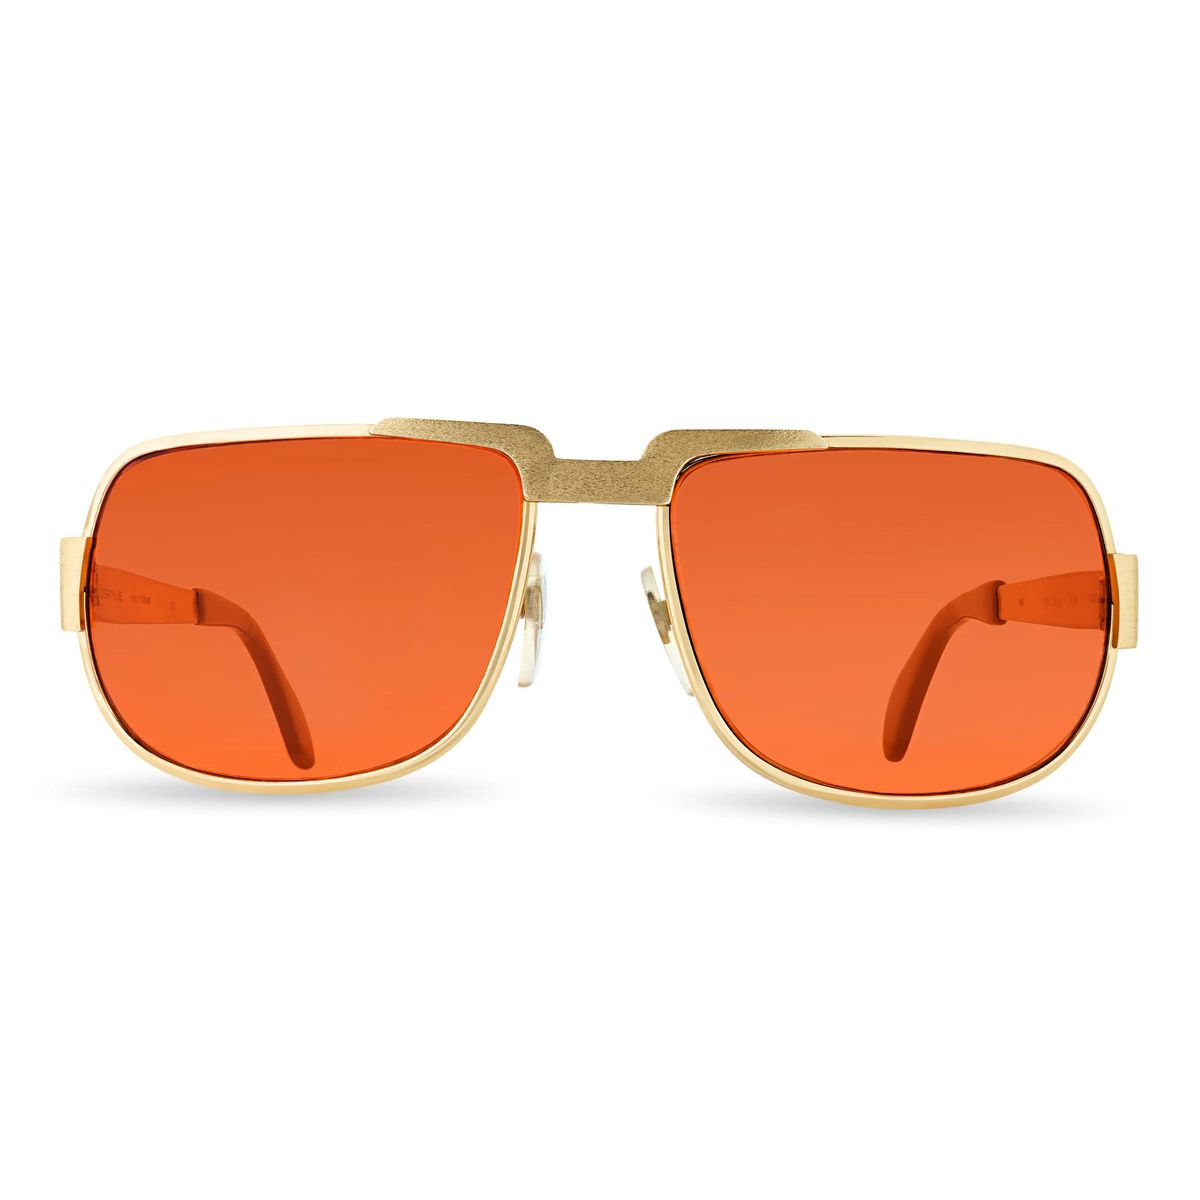 iconic pair of elvis sunglasses with gold frames and rose tinted lenses